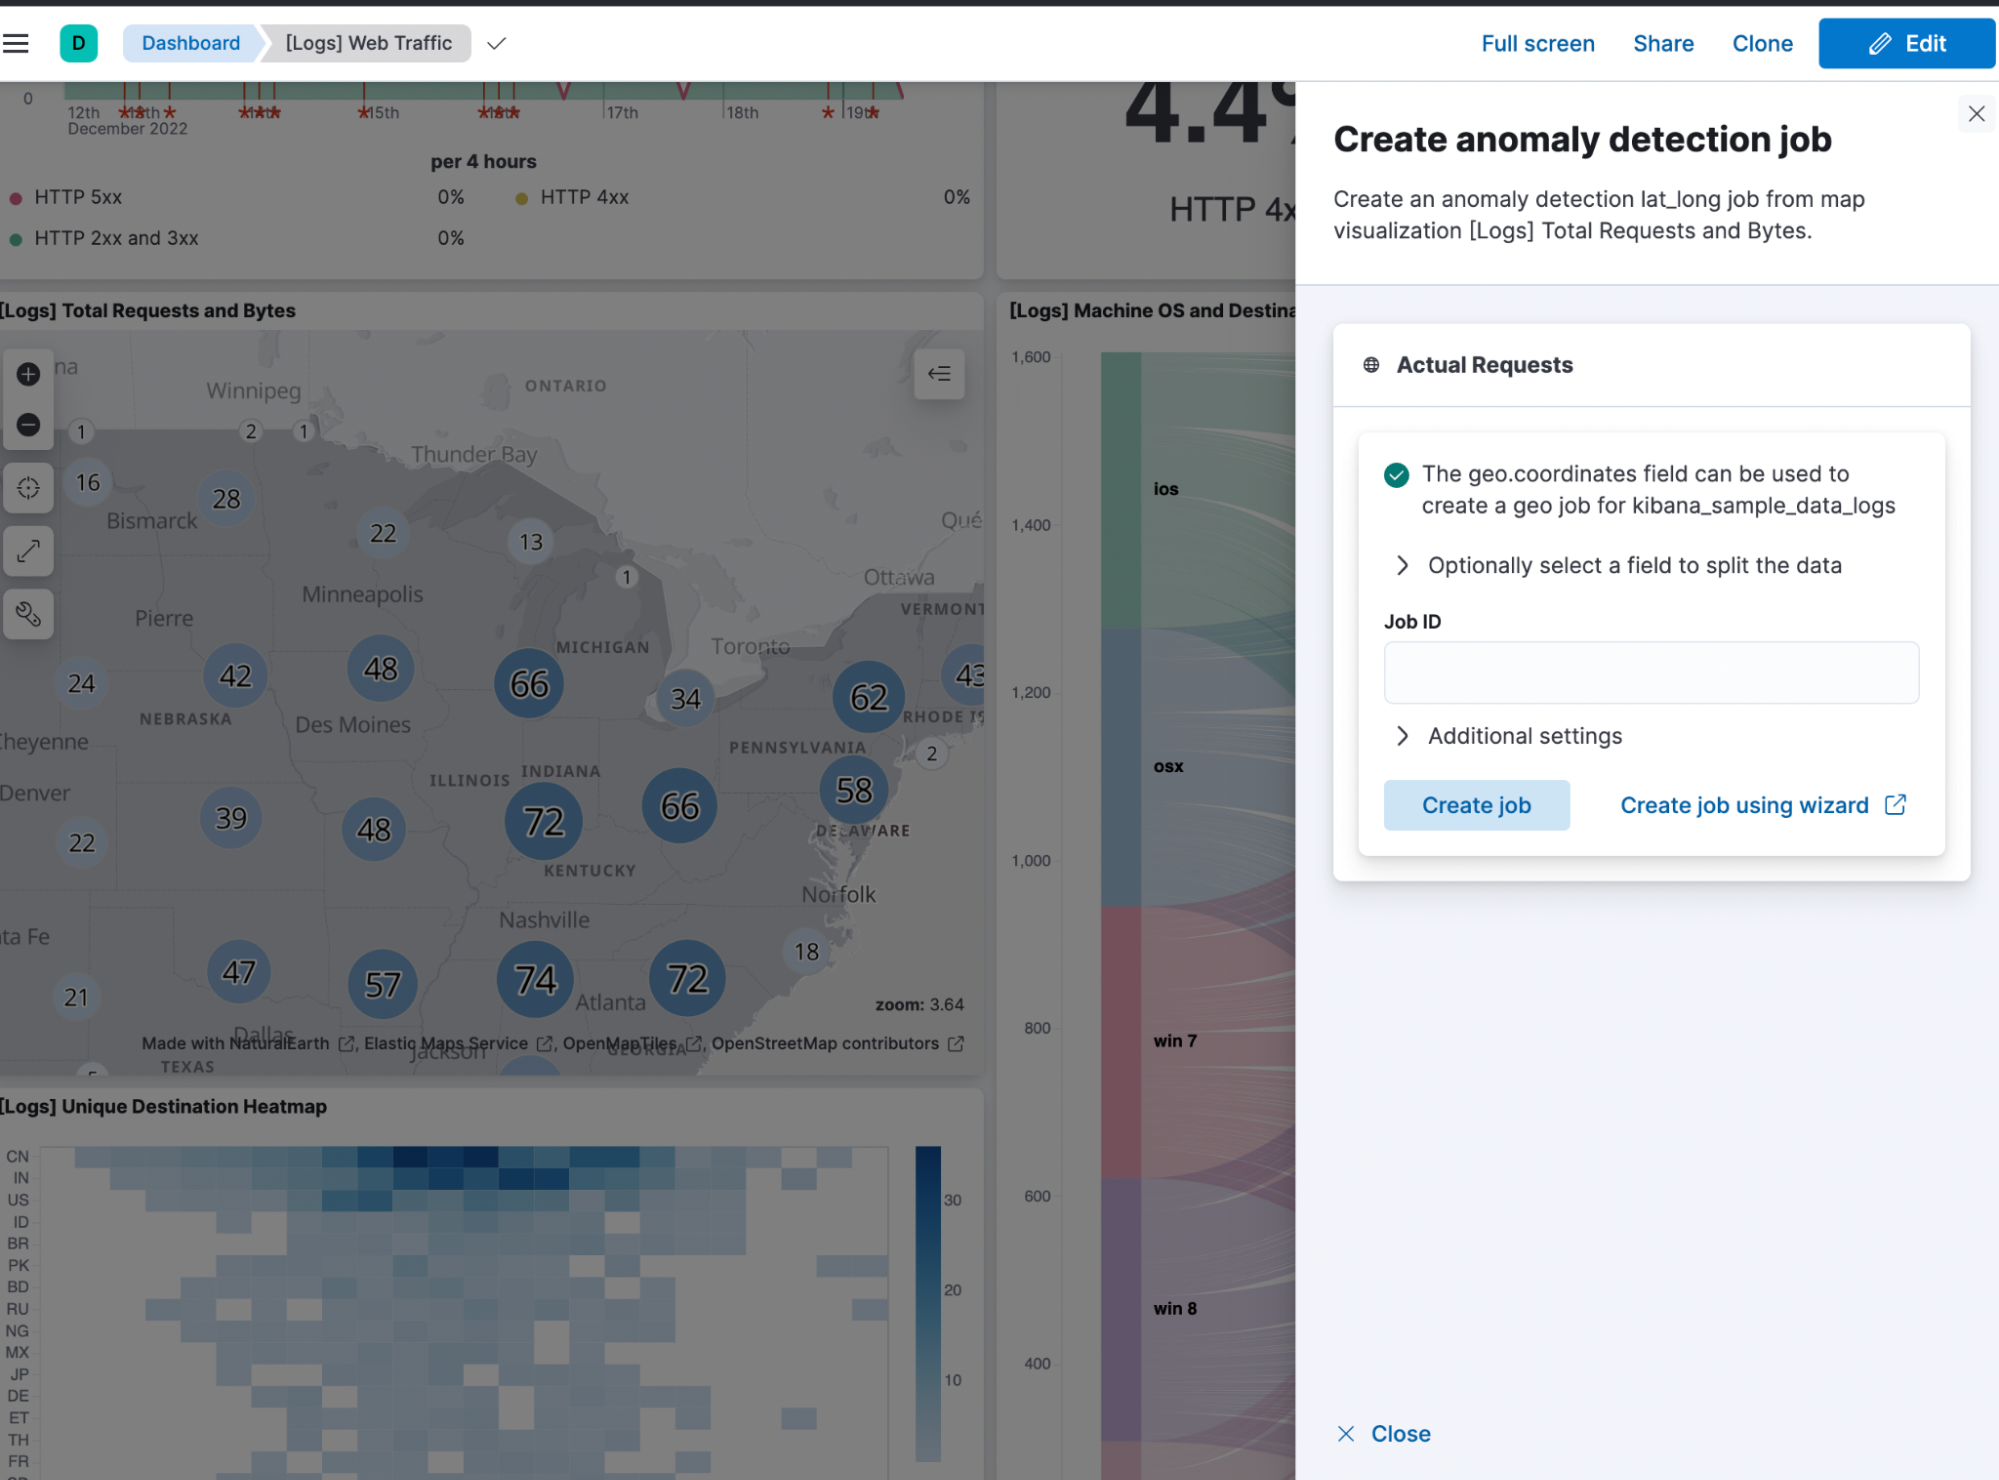 Create anomaly detection jobs from map visualizations